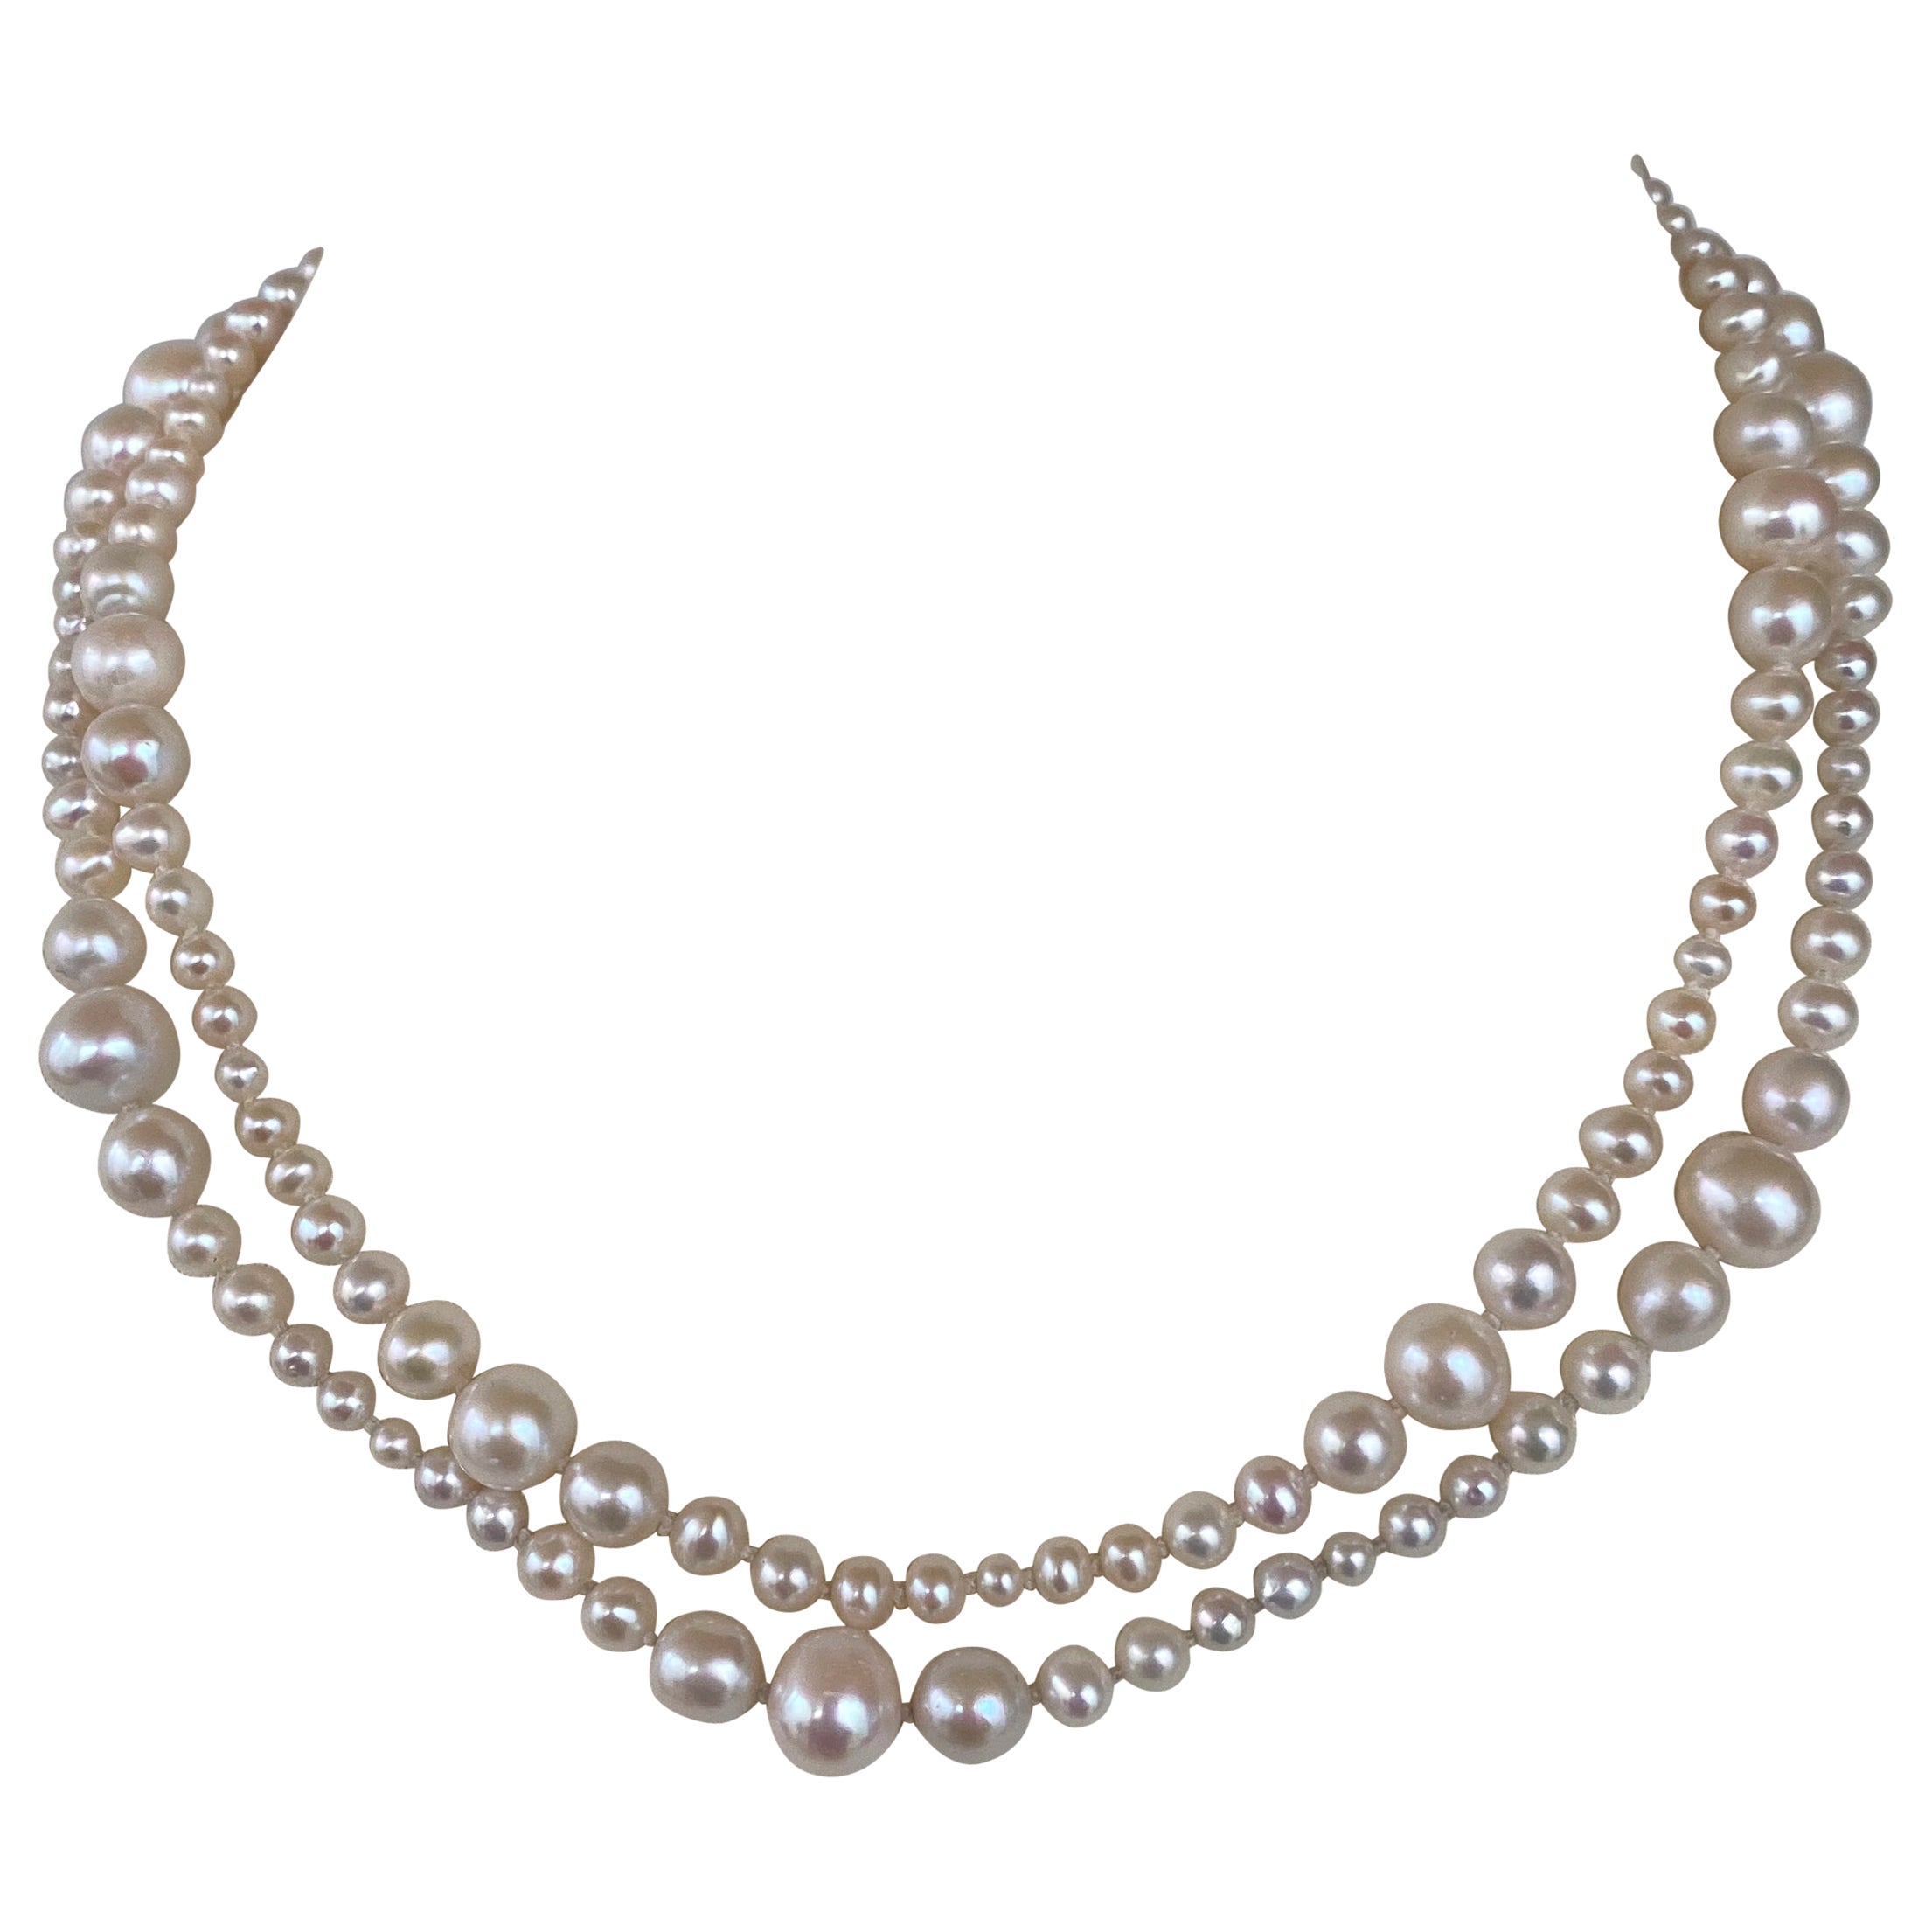 Marina J. Graduated Pearl Necklace with 14k White Gold Clasp